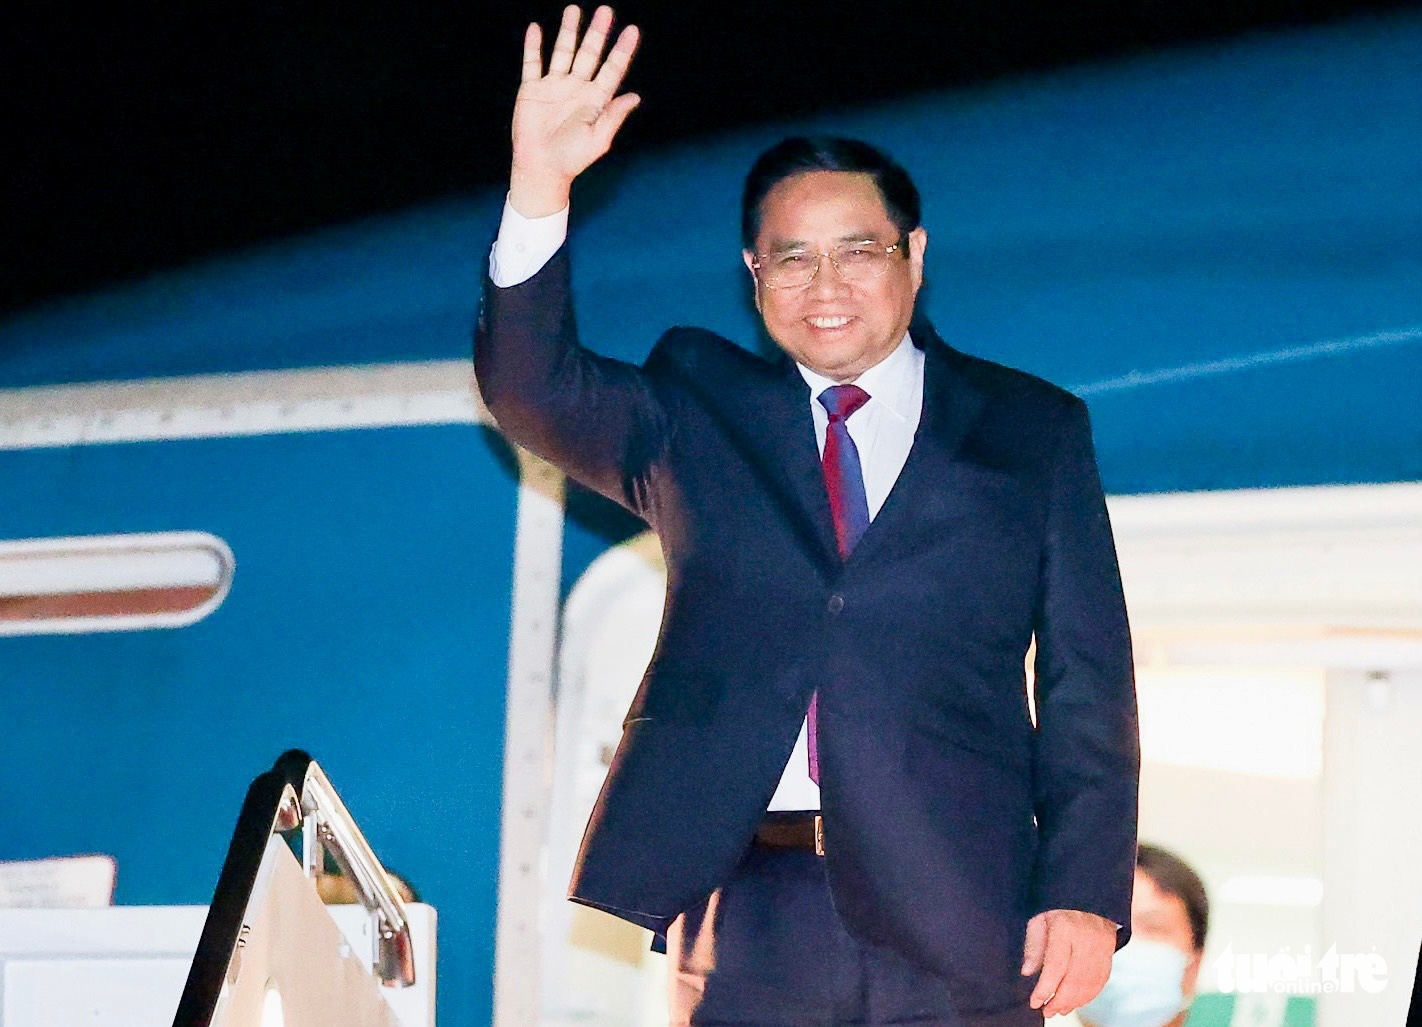 Vietnamese Prime Minister Pham Minh Chinh arrives in Washington D.C. on May 11, 2022. Photo: Nguyen Khanh / Tuoi Tre